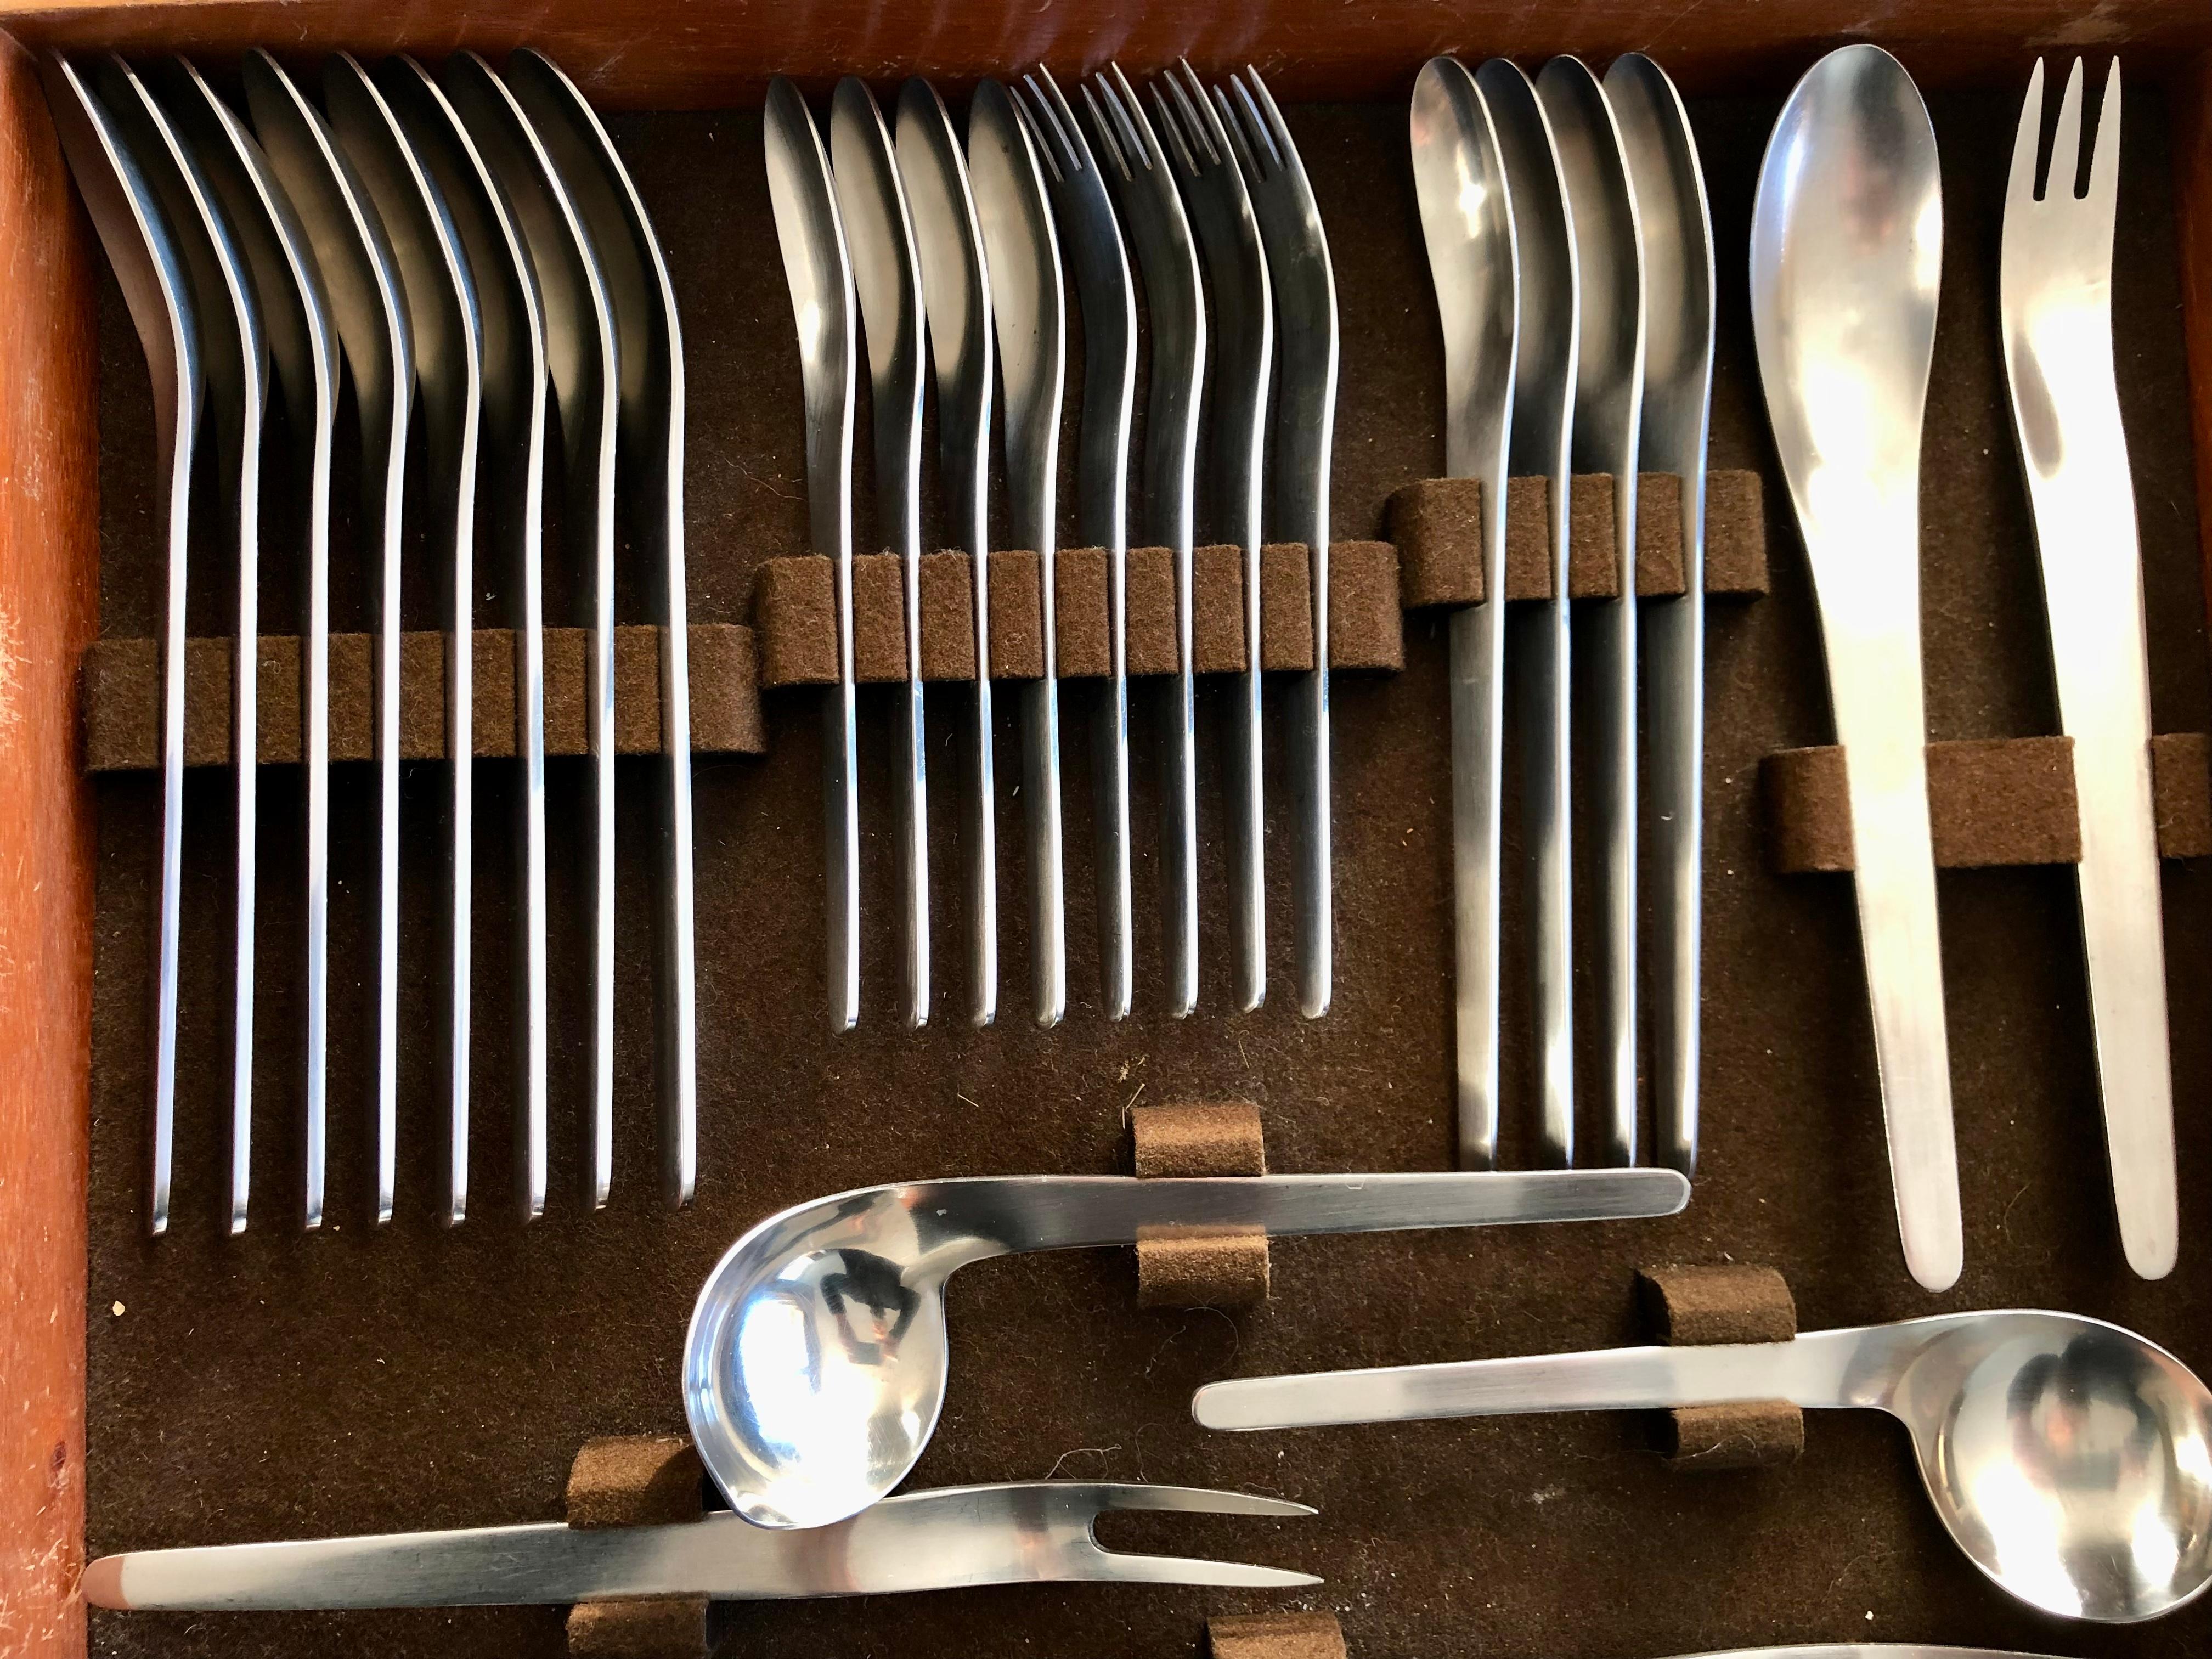 Space Age Early 77 Pc. Set of Arne Jacobsen for Anton Michelsen Flatware, Circa 1958